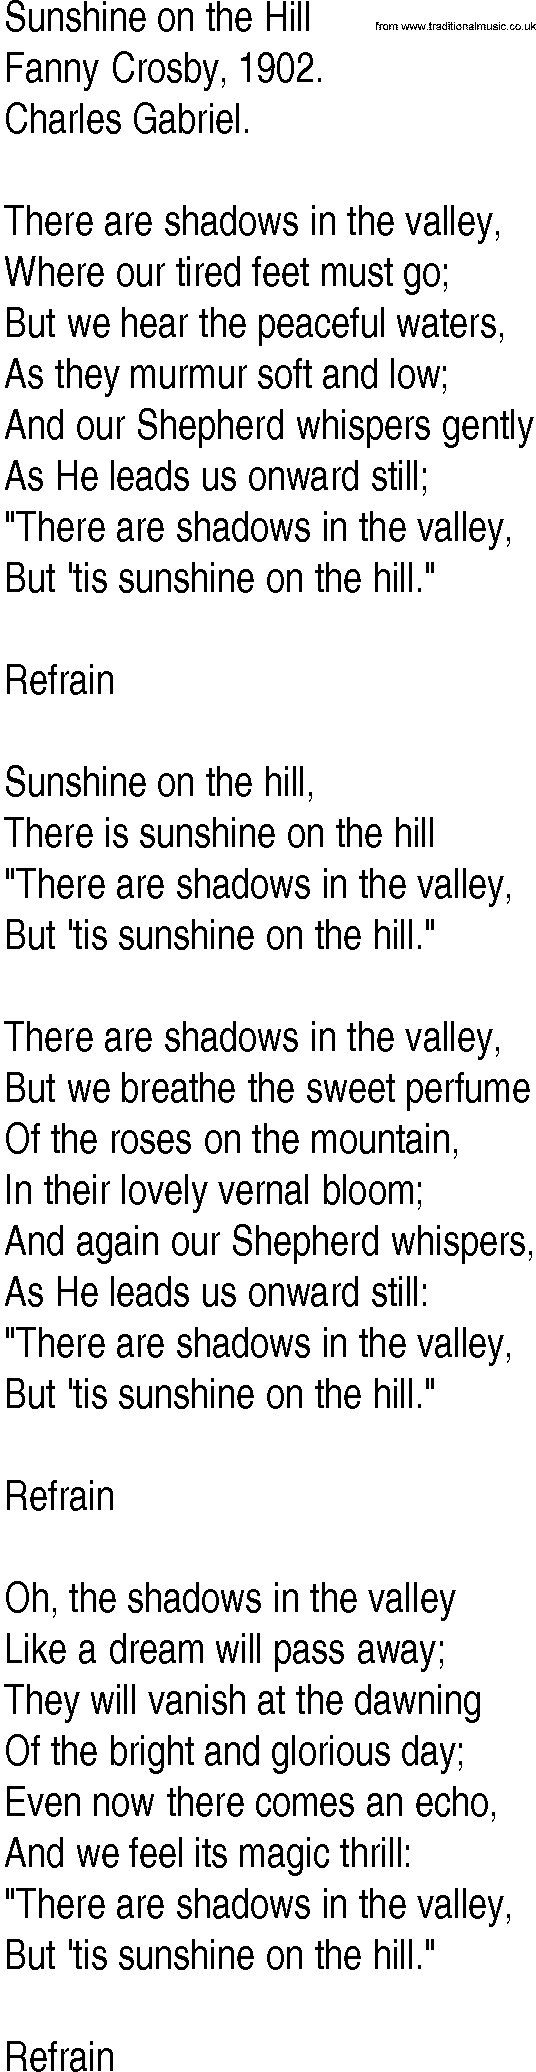 Hymn and Gospel Song: Sunshine on the Hill by Fanny Crosby lyrics